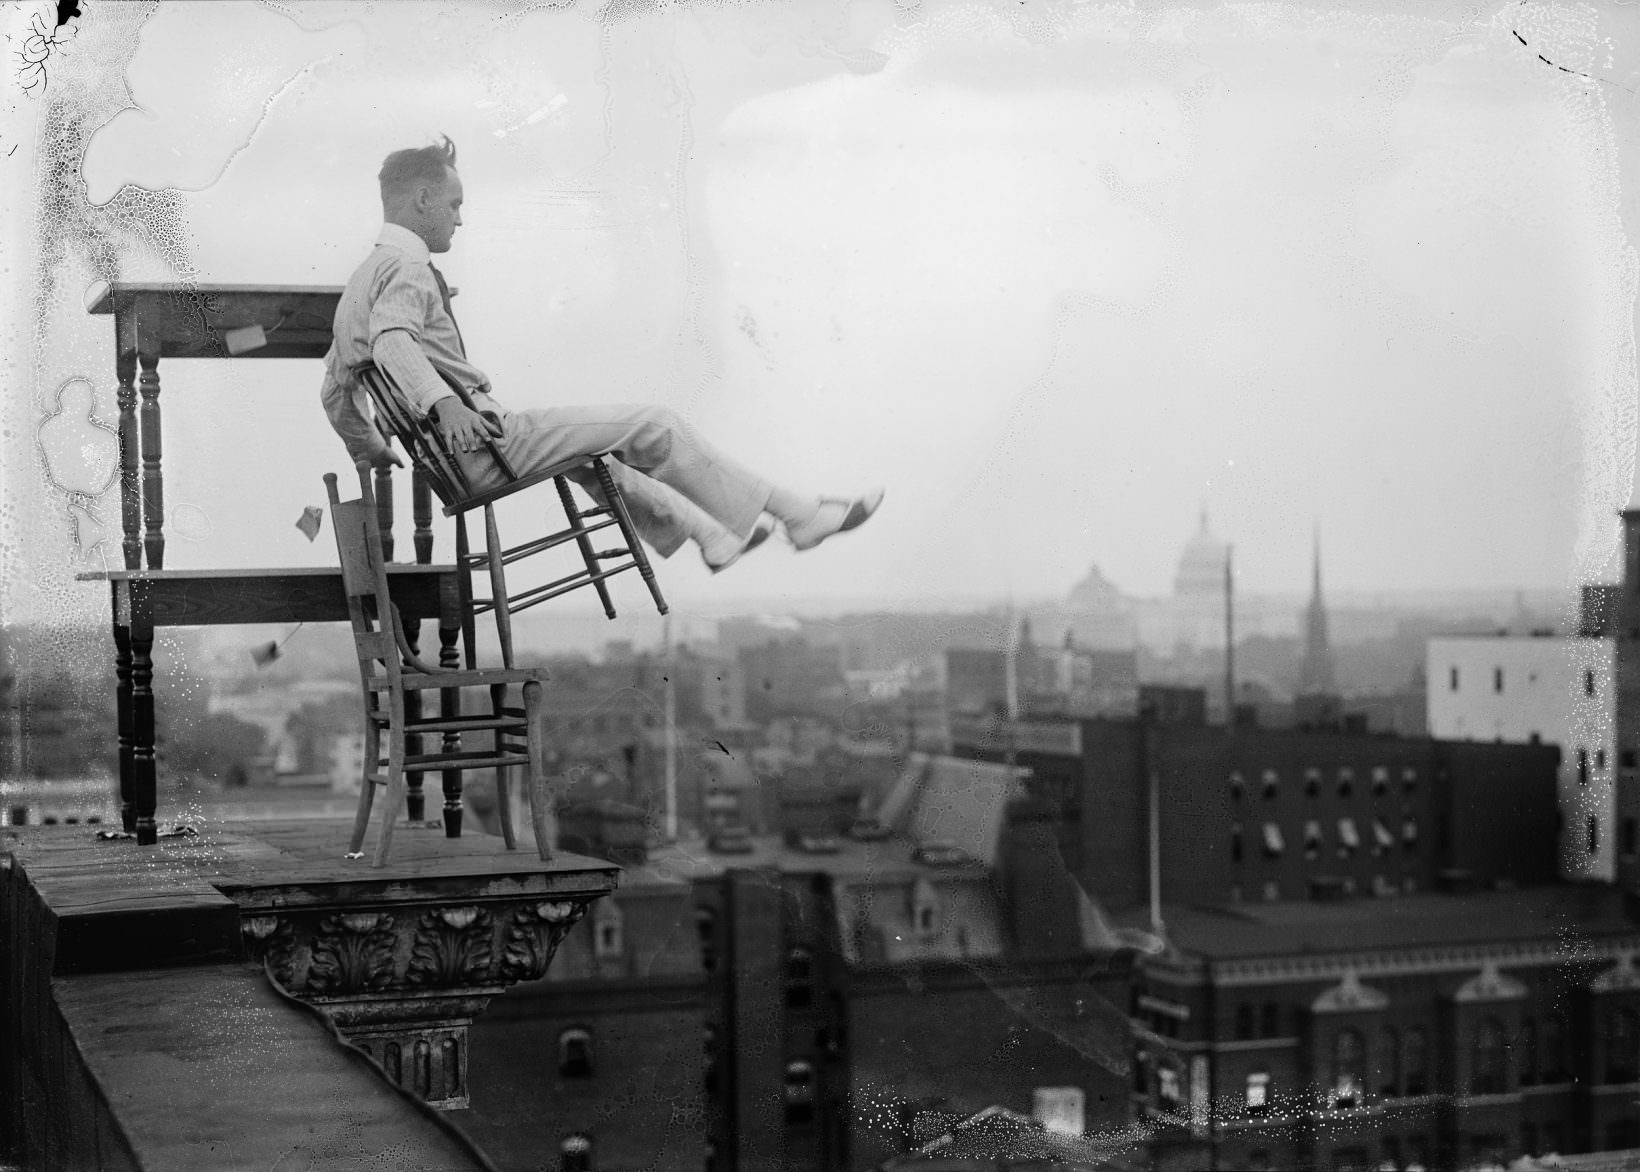 Daredevil Photos of People at The Extreme Heights from the Past that Will Make You Dizzy